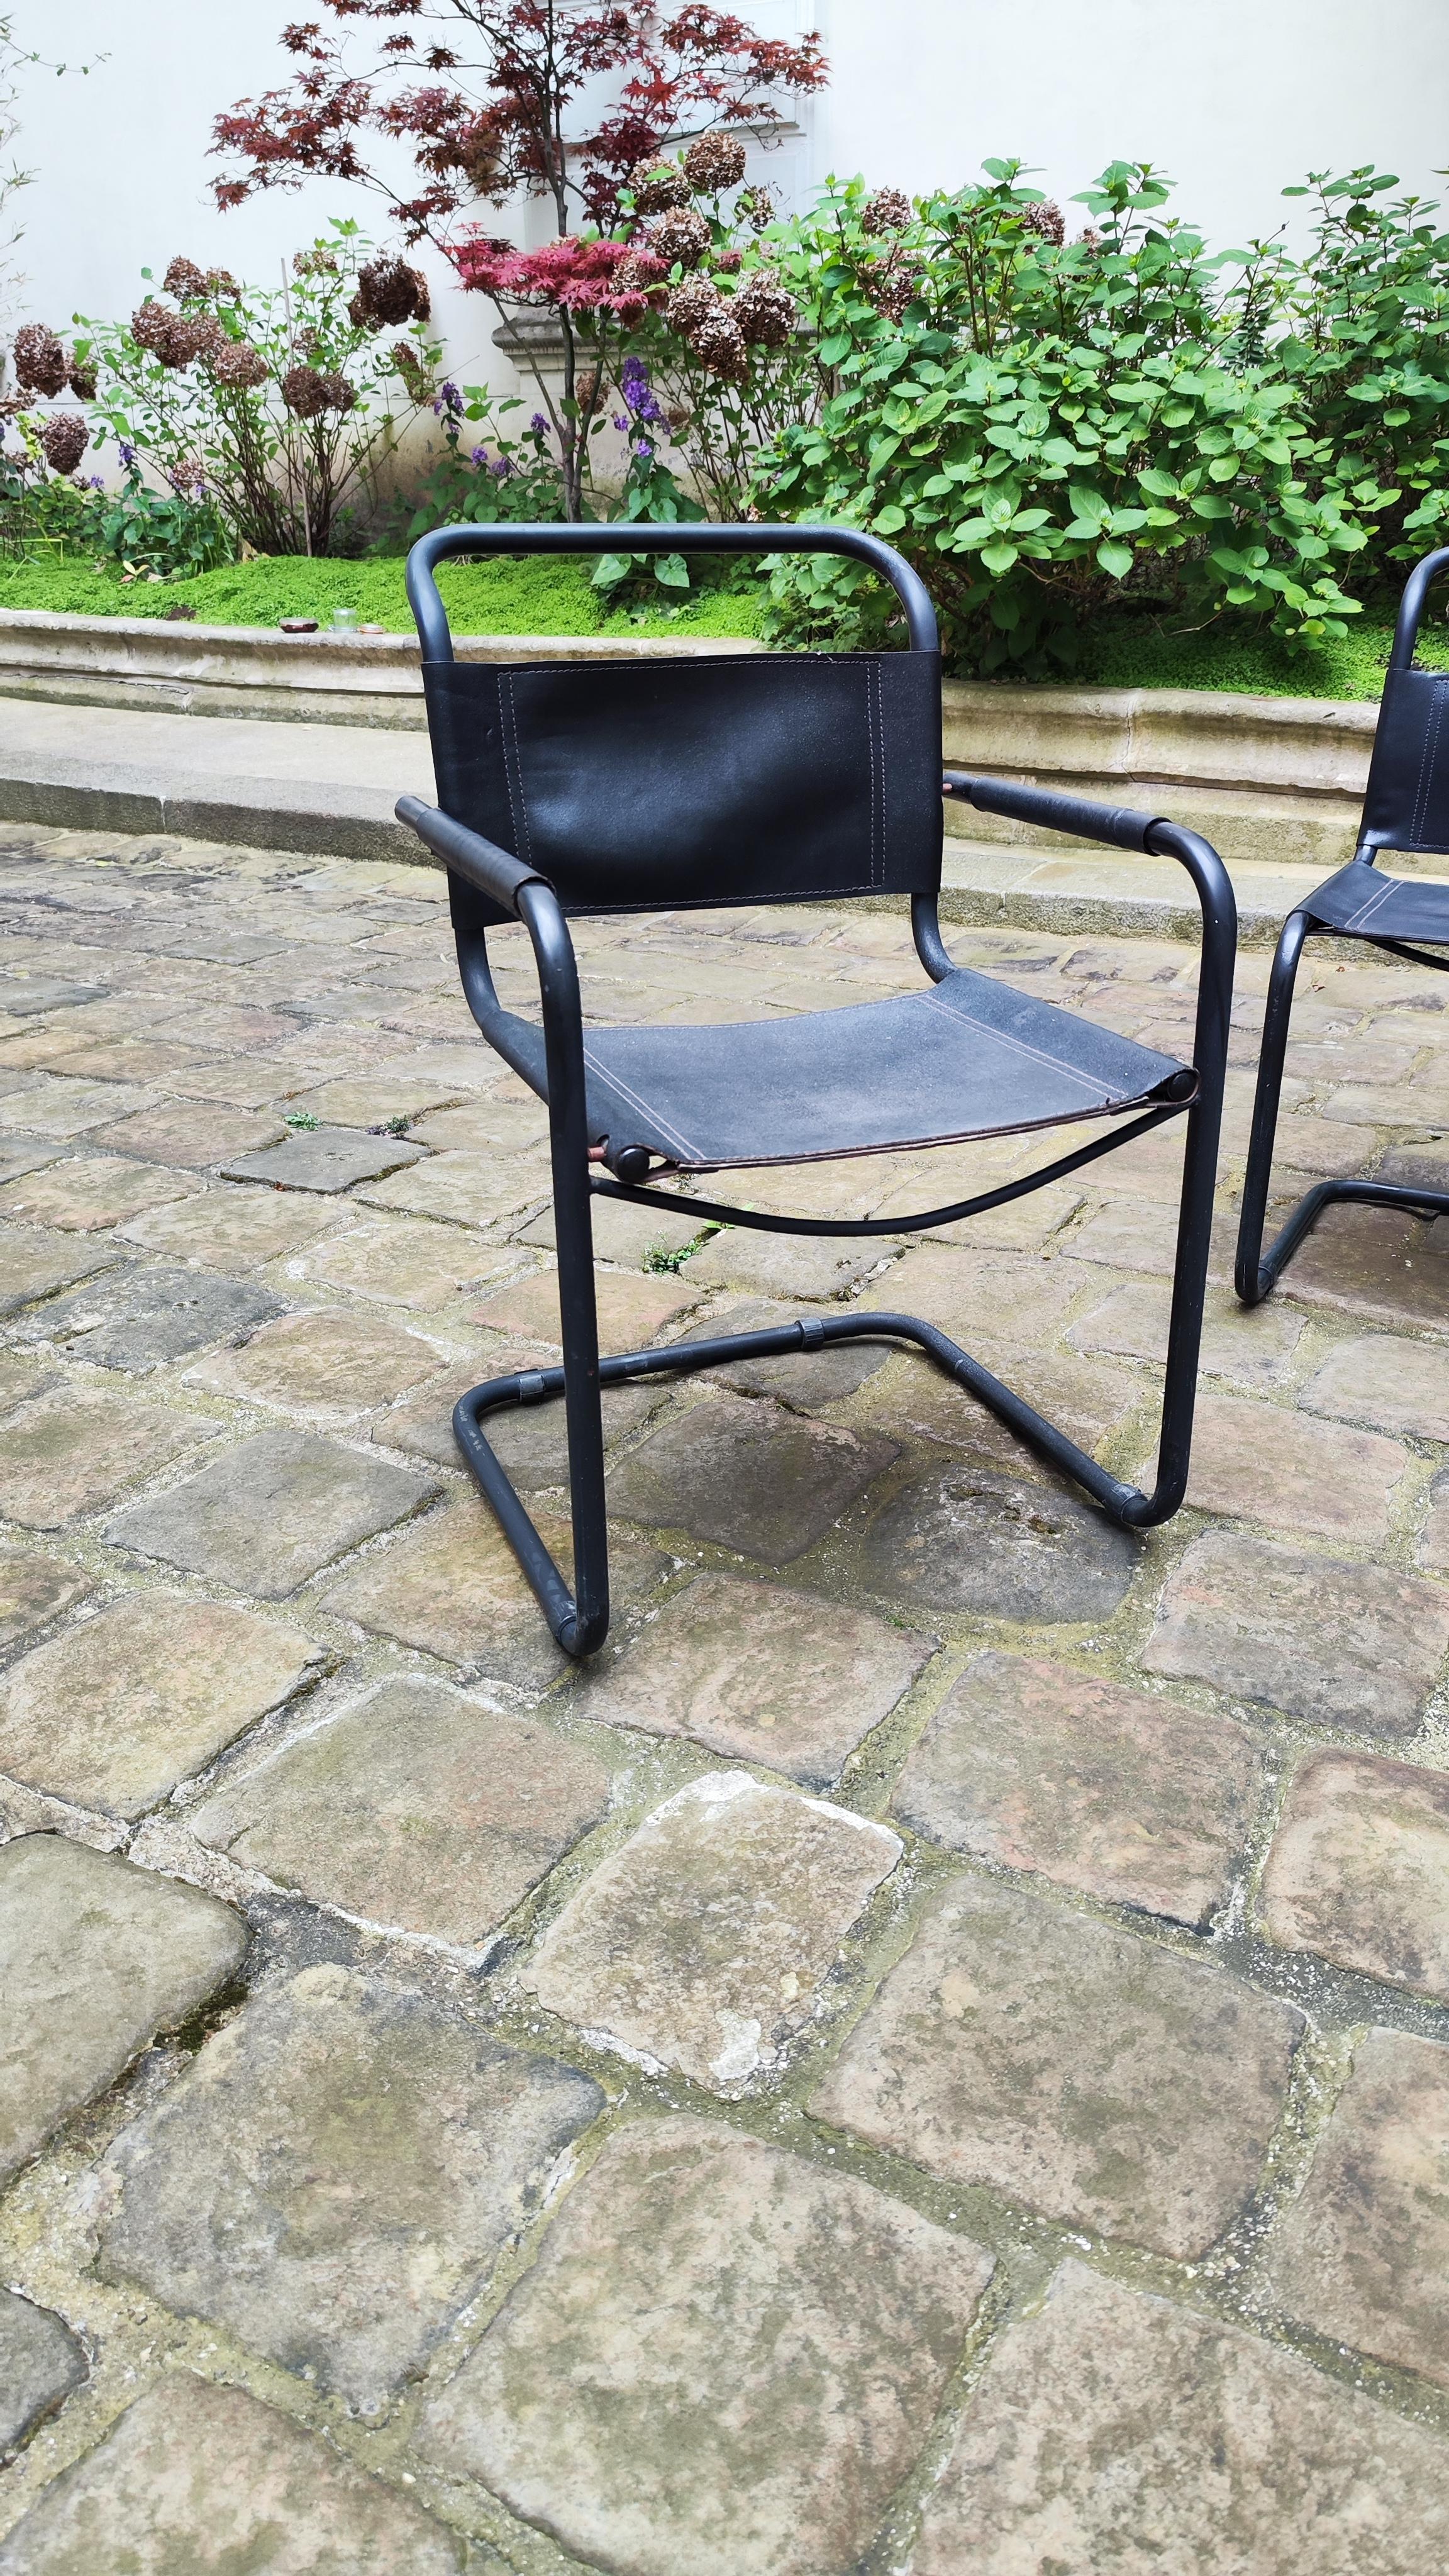 4 B33 MART STAM CANTILEVER CHAIRS AND 1 S34 ARMCHAIR - 80s  - 1980 For Sale 7